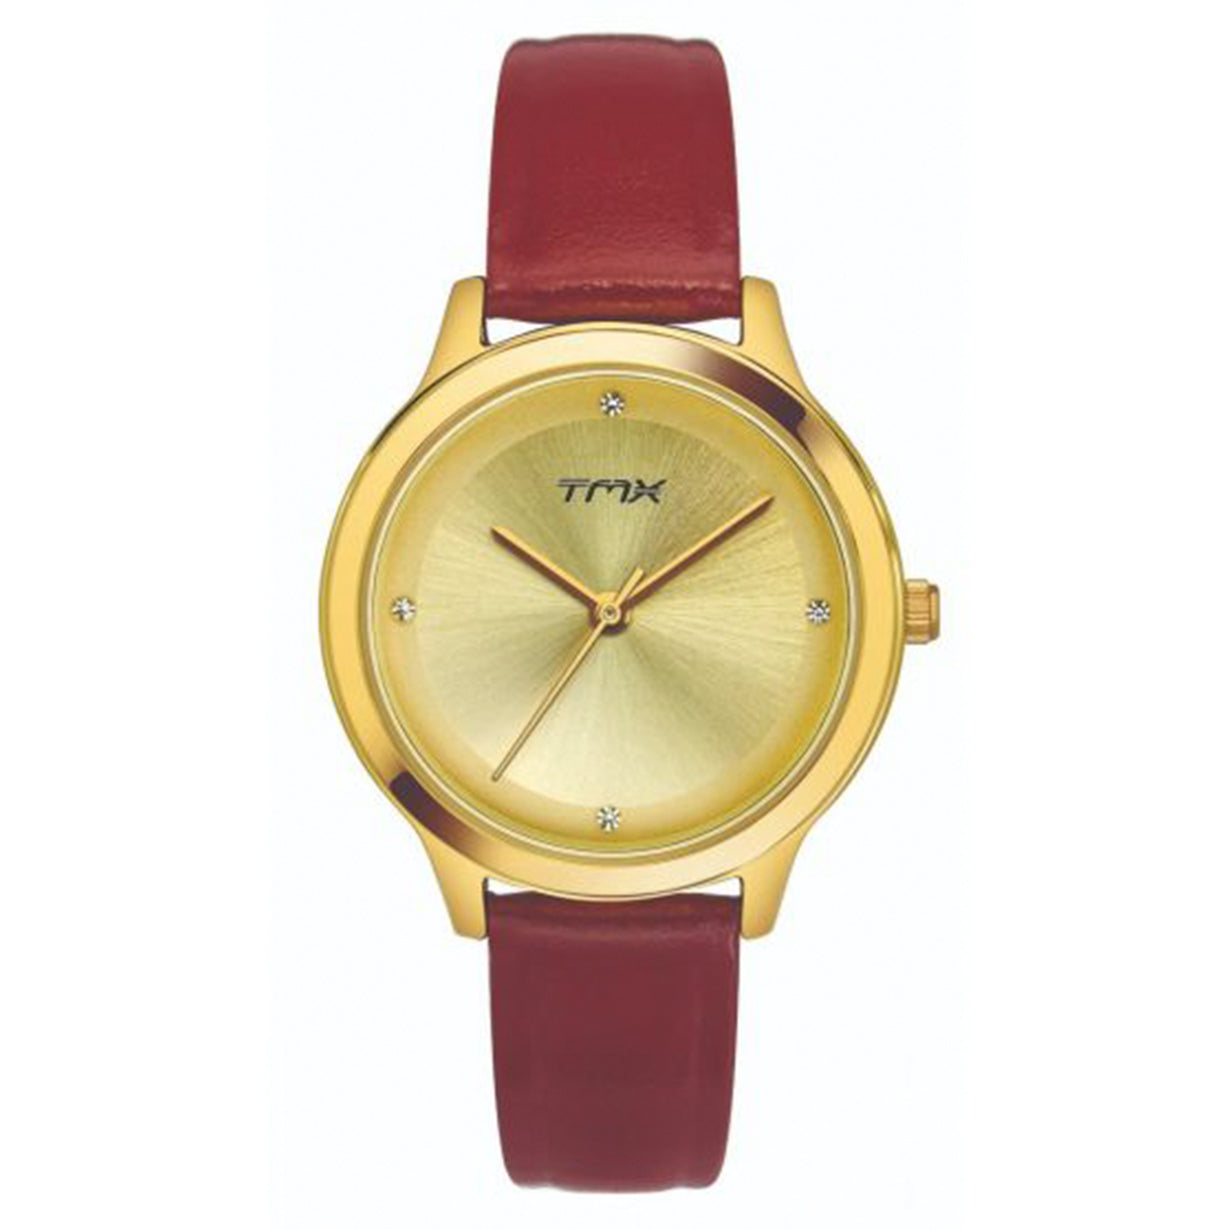 TMX Golden Dial Leather Strap